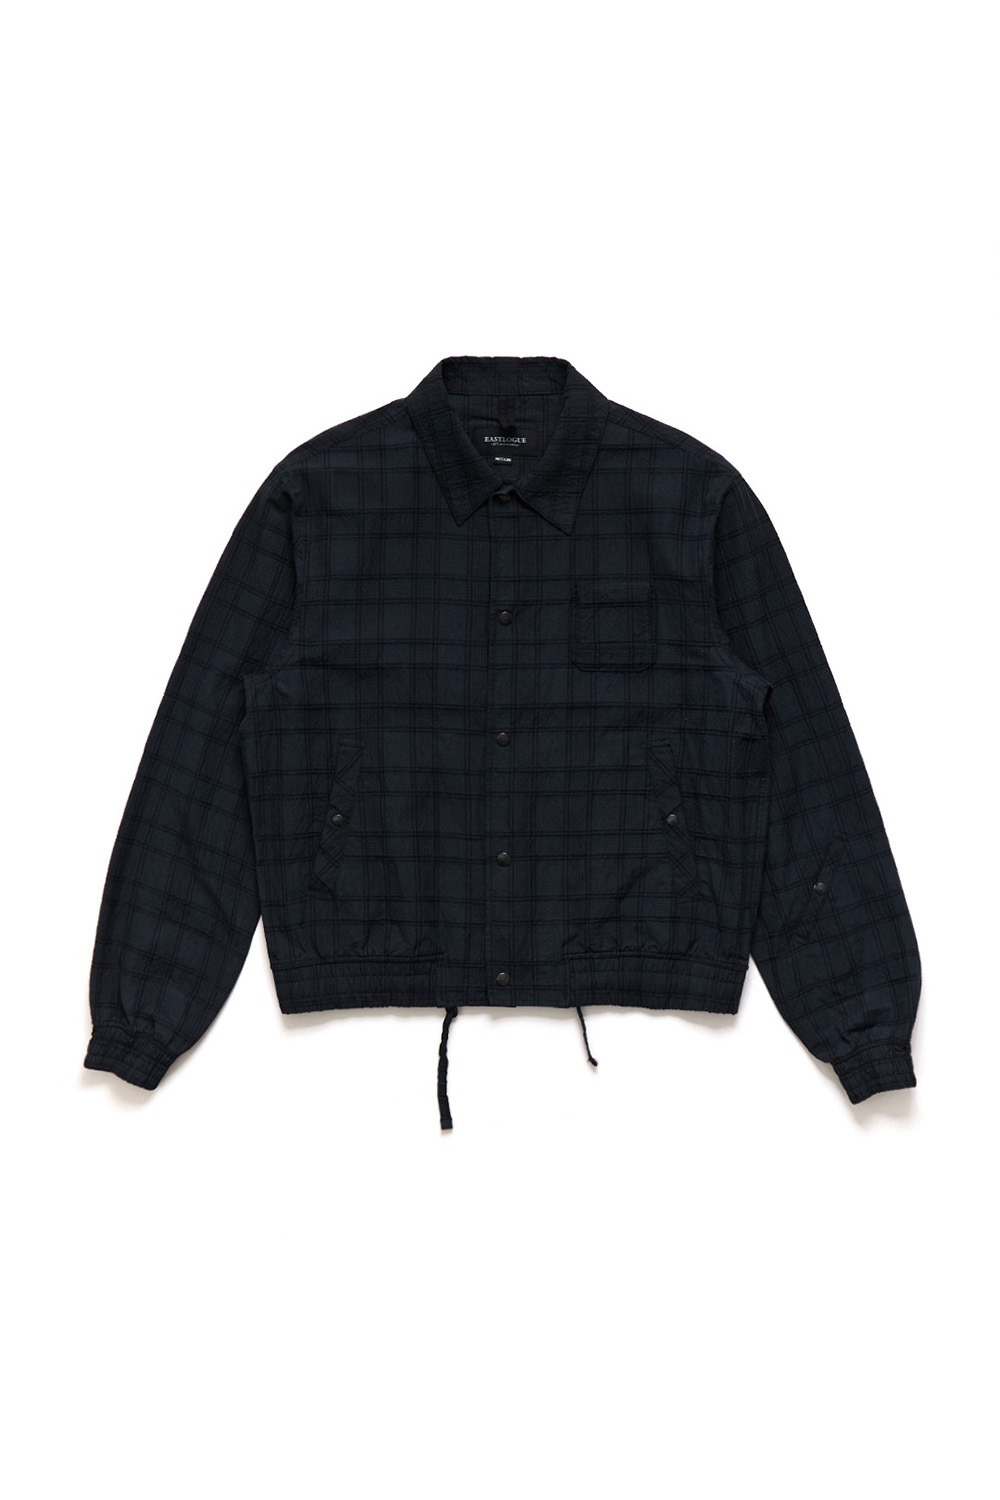 (3/31 pre-order delivery) FRENCH COACH JACKET/BLACK GREY CHECK